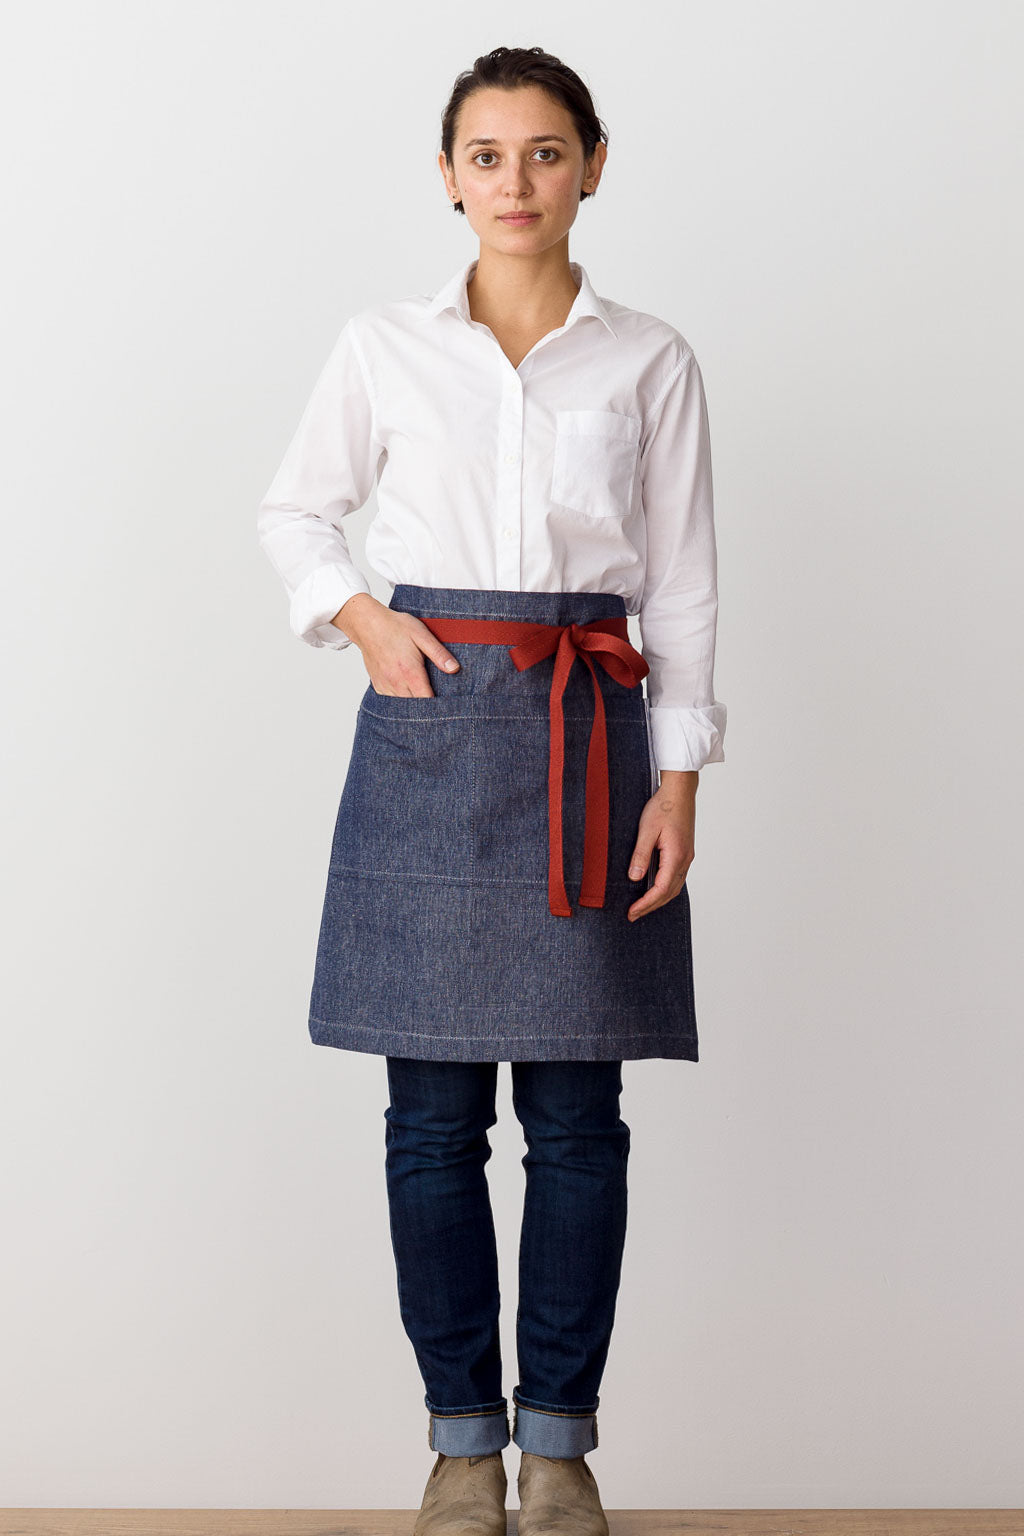 Bistro Middly Apron, 20"L, Blue Denim with Red Straps, Men and Women